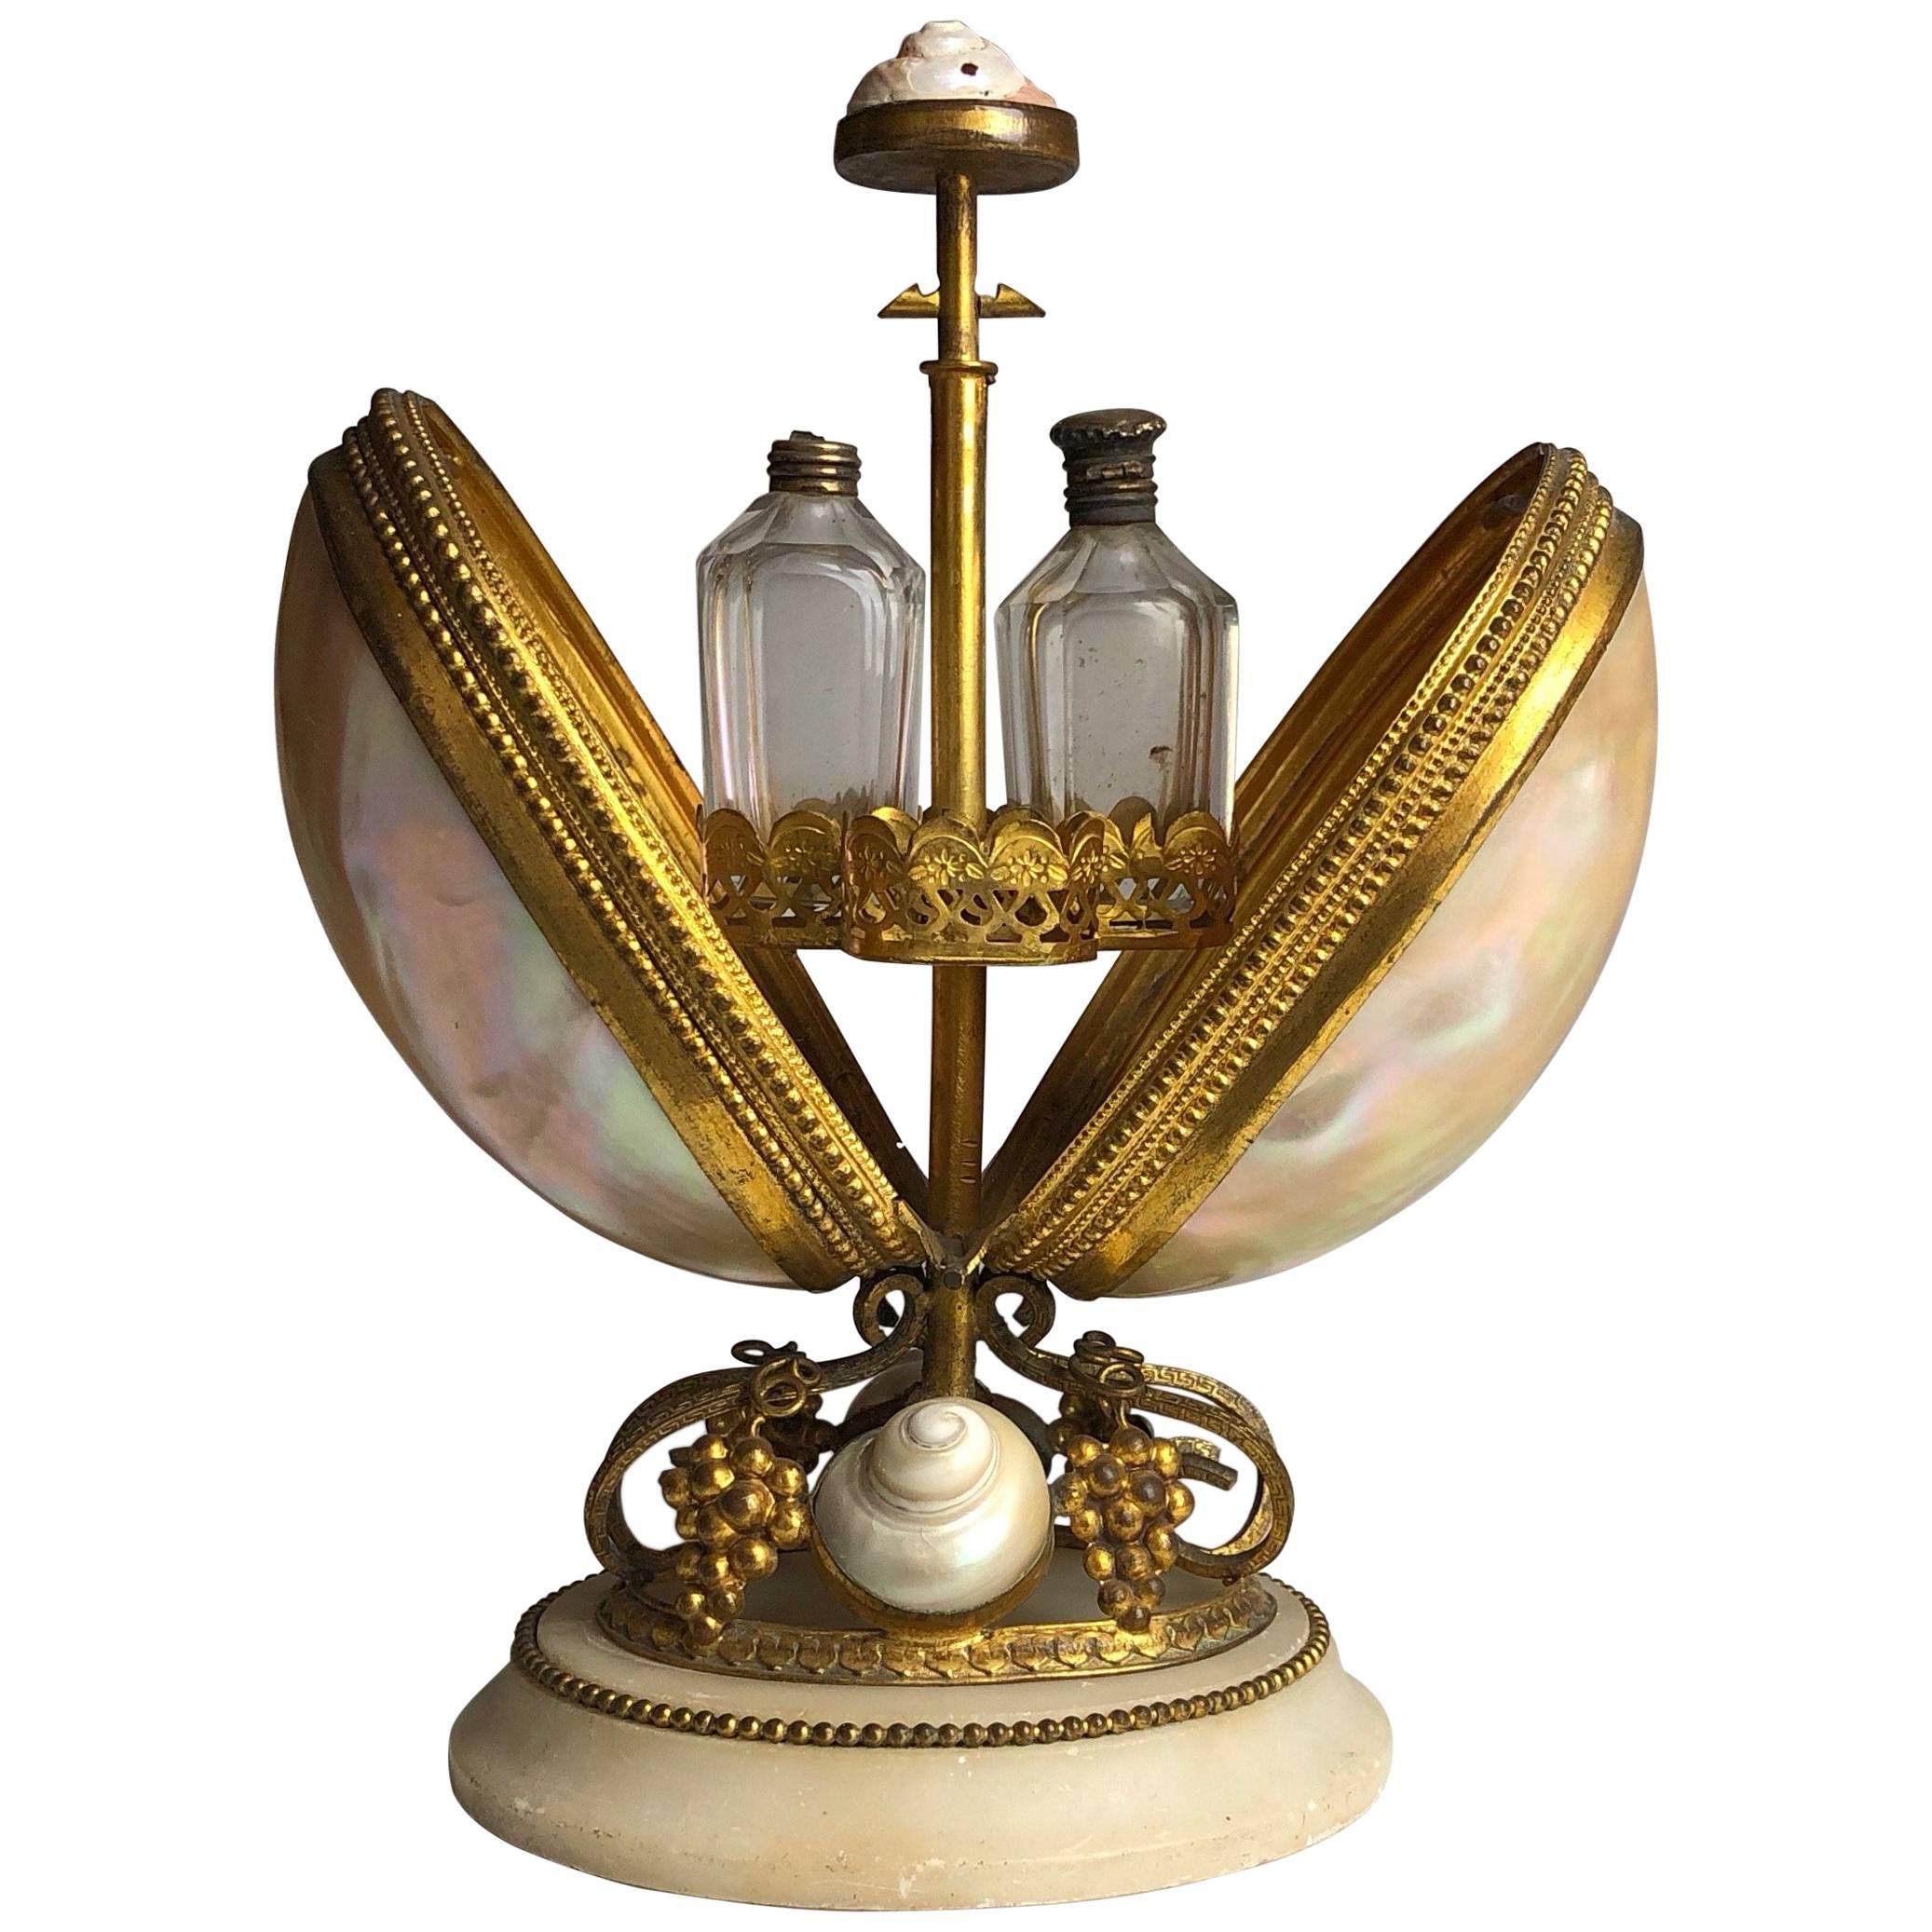 19th Century French Mechanical Perfume or Scent Caddy, Mother-of-Pearl Shells